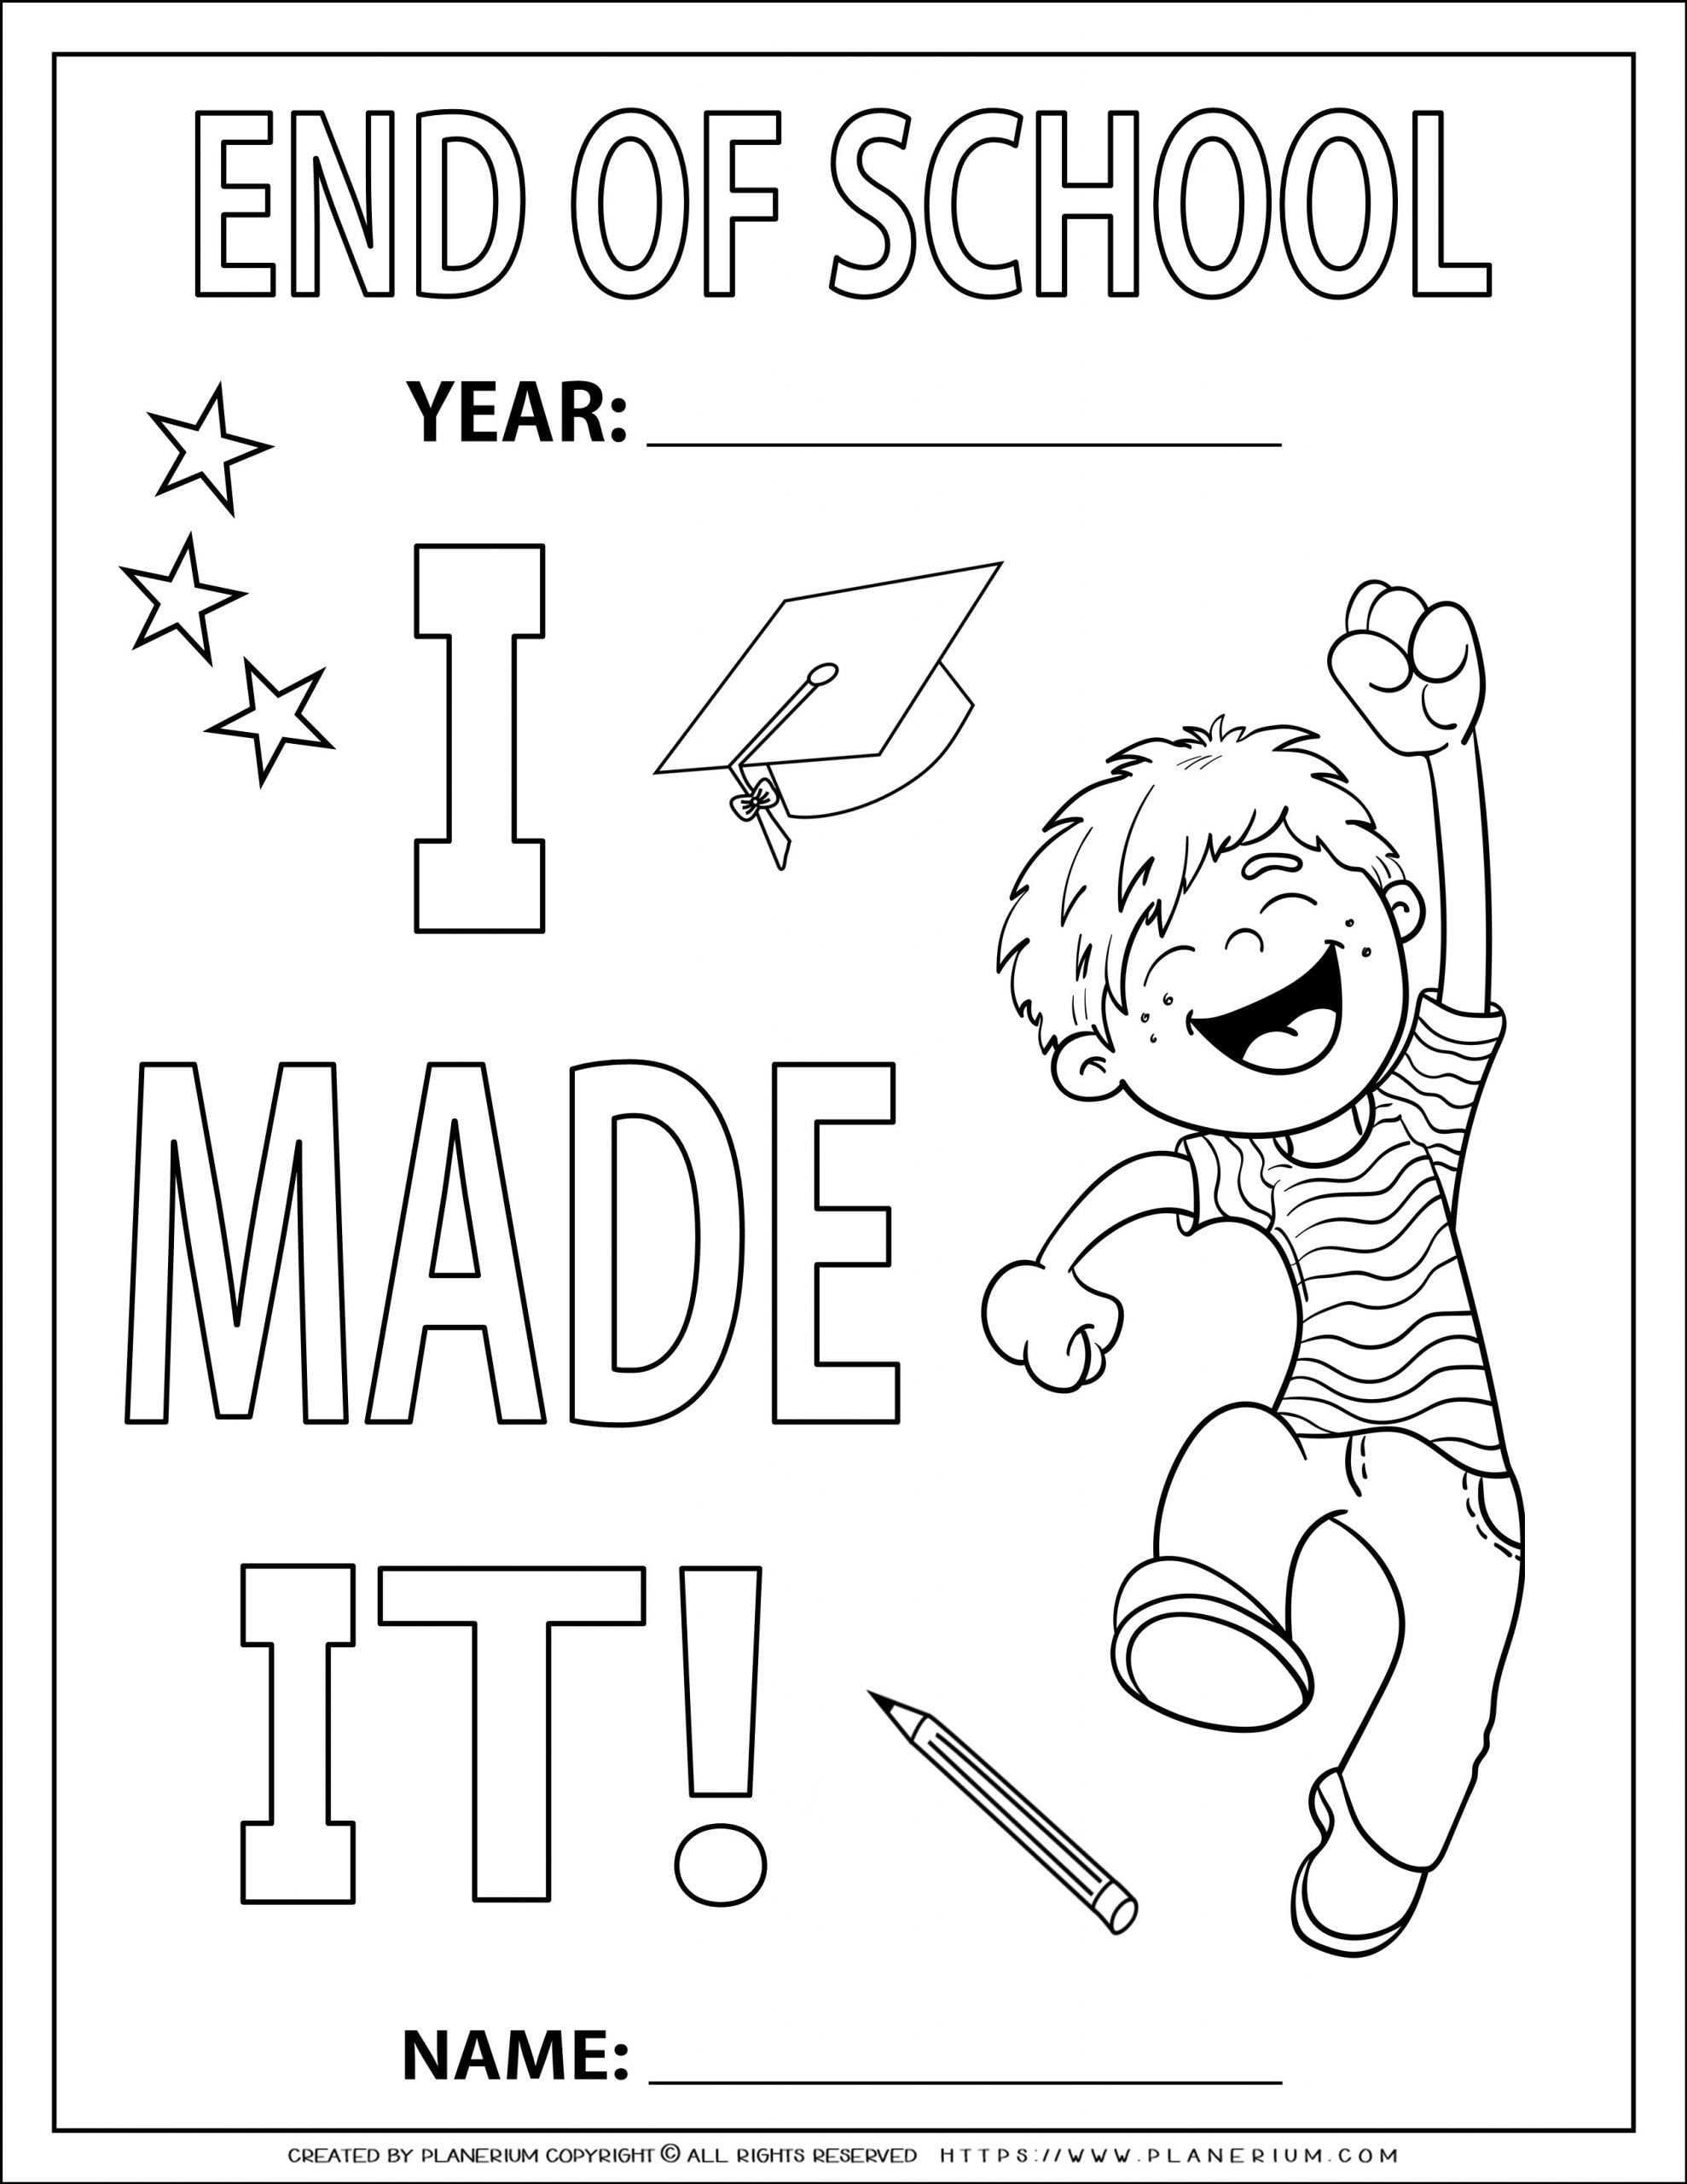 End of Year   Coloring Page   I Made It for a Boy   Planerium